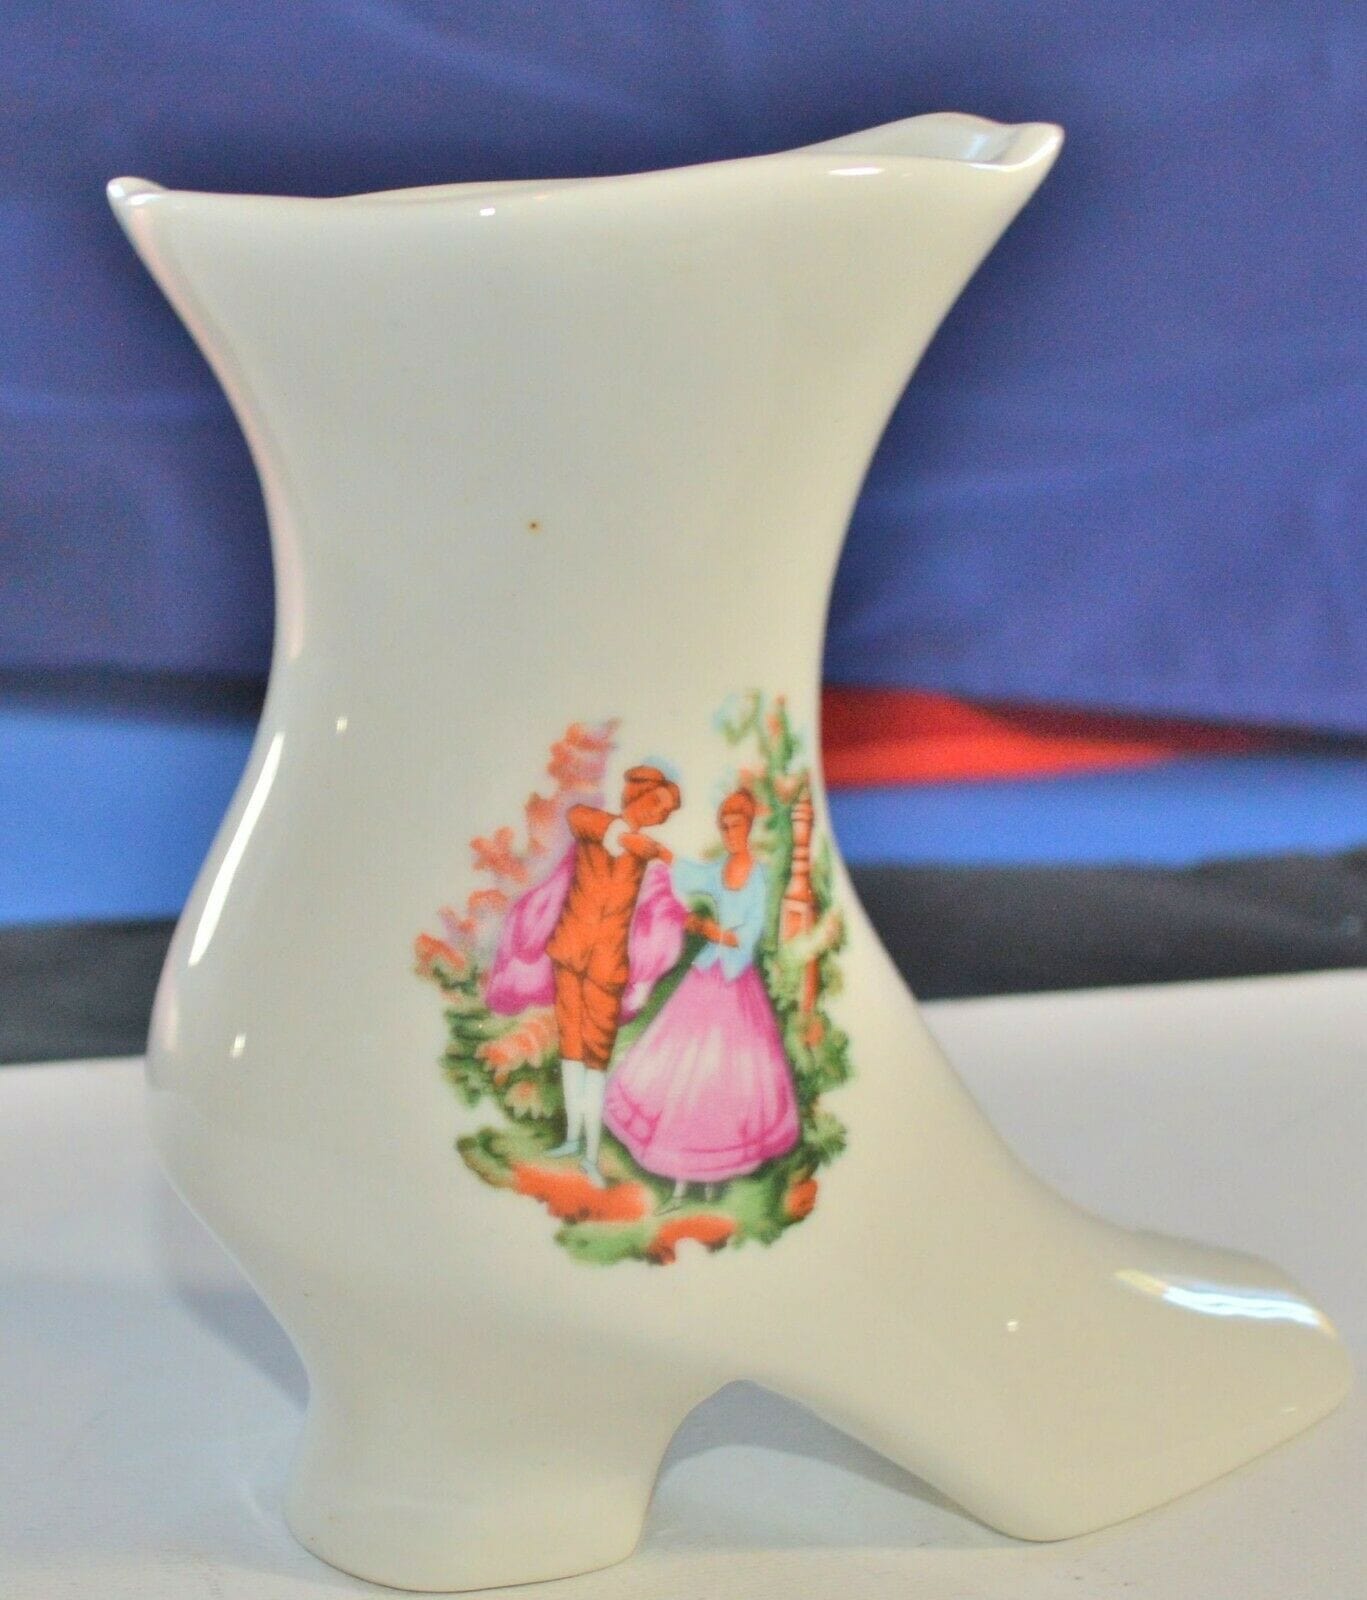 ORNAMENTAL BOOT DEPICTING A PERIOD STYLE COURTING COUPLE(PREVIOUSLY OWNED) GOOD CONDITION - TMD167207